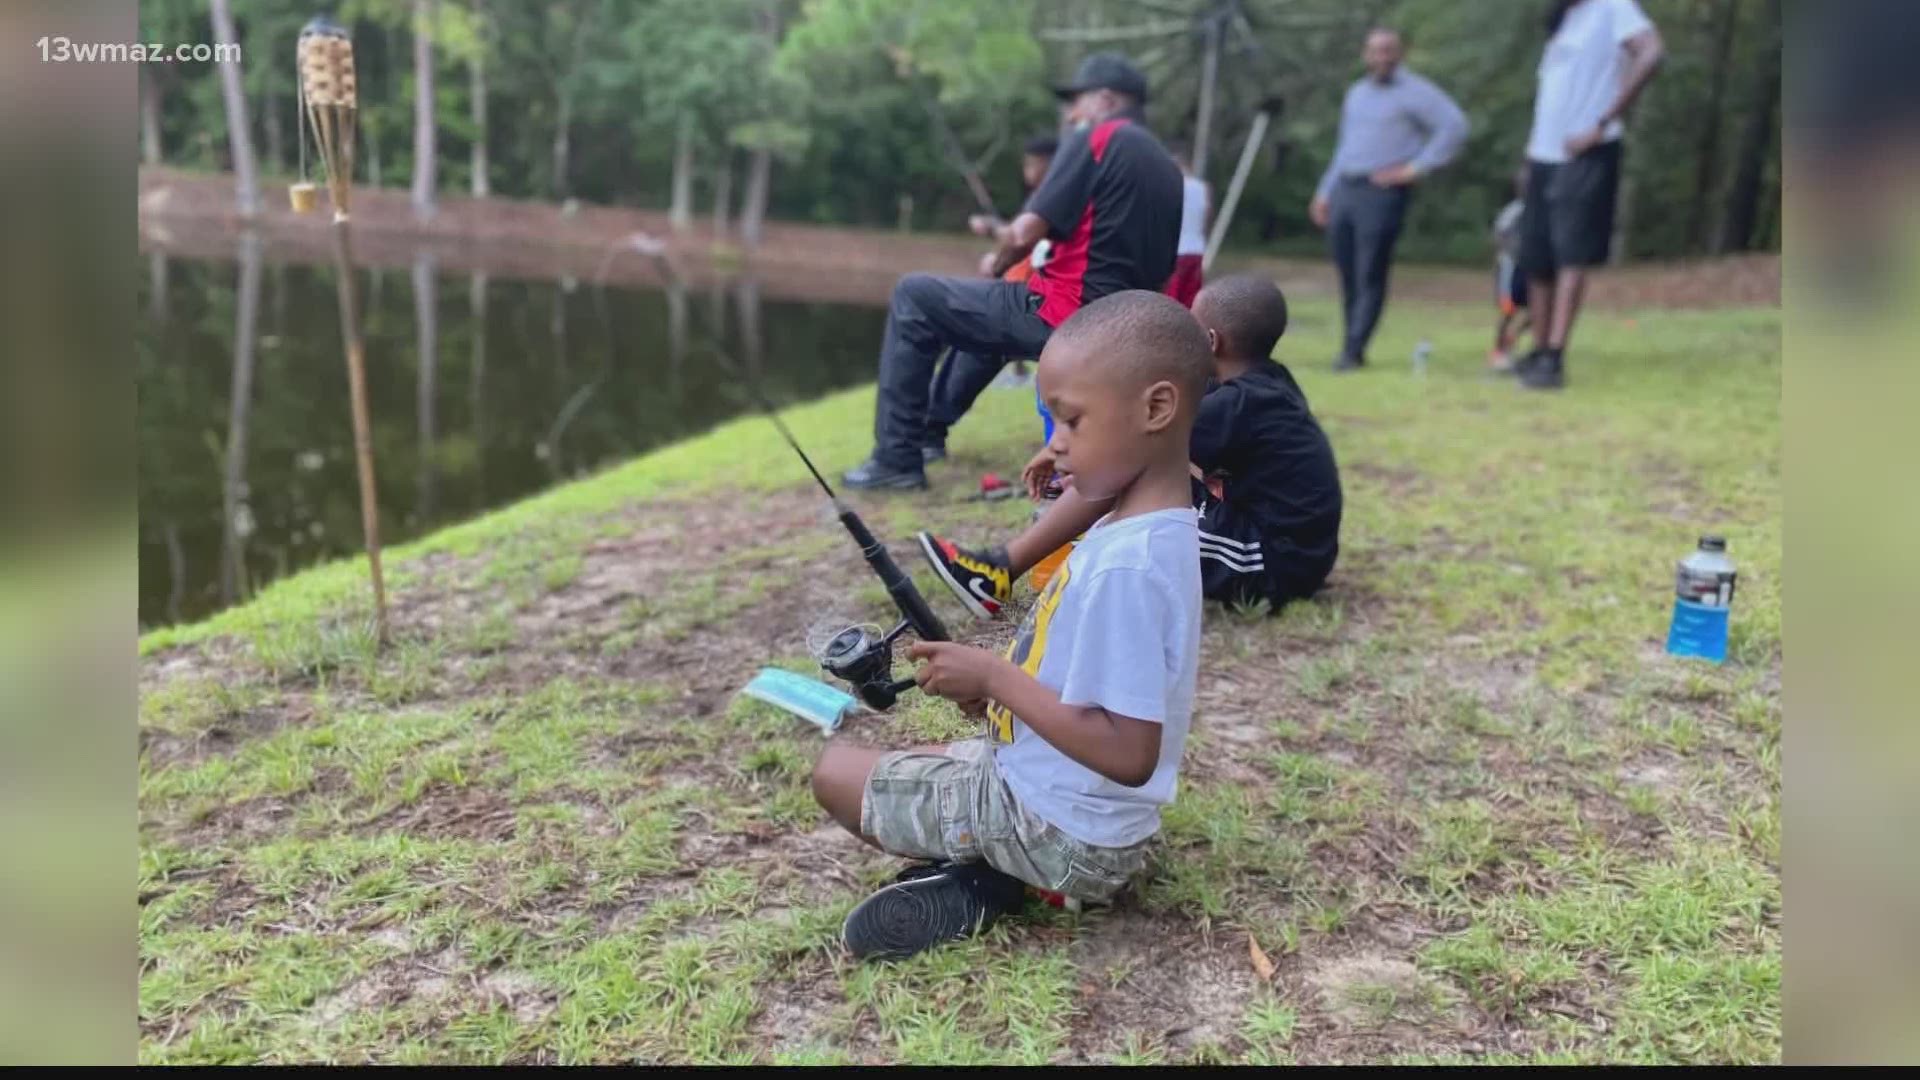 The I Am King Foundation's 'Fishing With Dad' event is hoping to help strengthen family and community connections outside of the home.